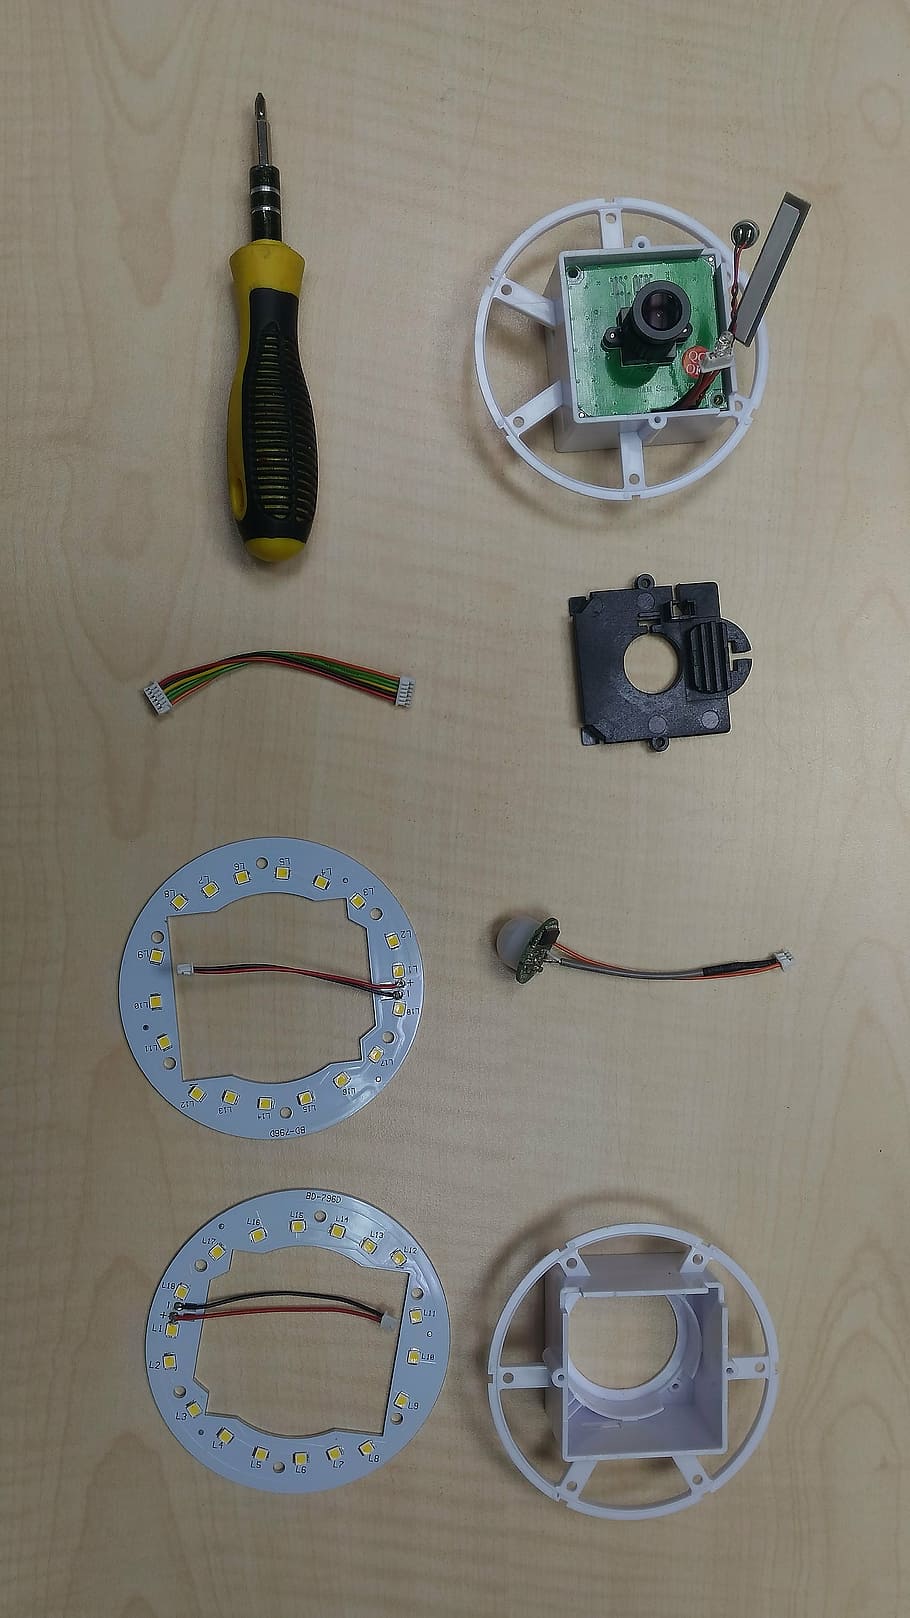 component, module, screw, led, pcb, still life, indoors, high angle view, directly above, table